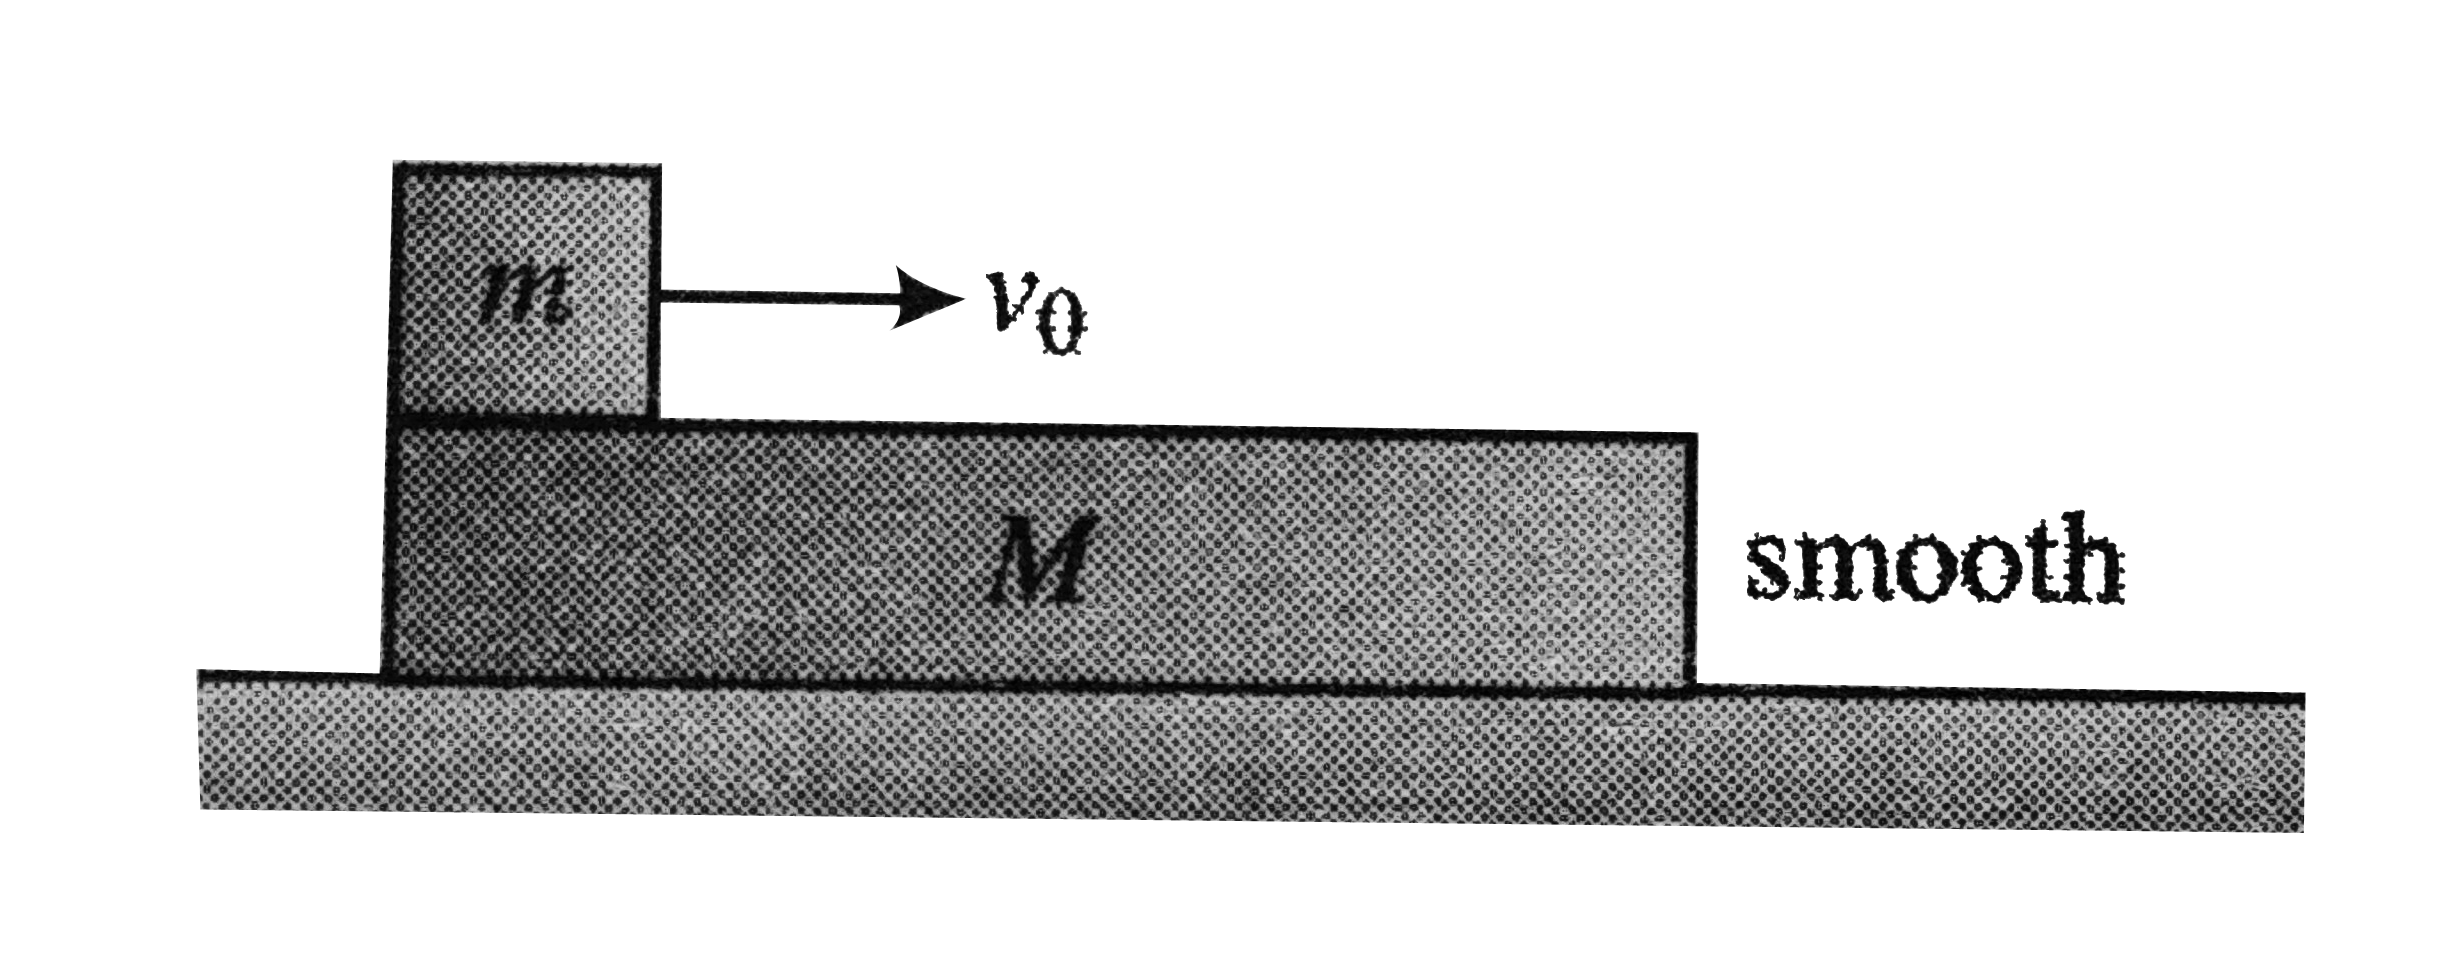 A plank of mass M and length L is placed at rest on a smooth horizontal surface. A small block of mass m is projected with a velocity v0 from the left end of it as shown in figure. The coefficient of friction between the block and the plank is m, and its value is such that the block becomes stationary with respect to the plank before it reaches the other end.      a. Find the time and common velocity when relative sliding between the block and the plank stops.   b. Find the work done by the friction force on the block during the period it slides on the plank. Is the work positive or negative?   c. Calculate the work done on the plank during the same period. Is the work positive or negative?   d. Also, determine the net work done by friction, Is it positive or negative?